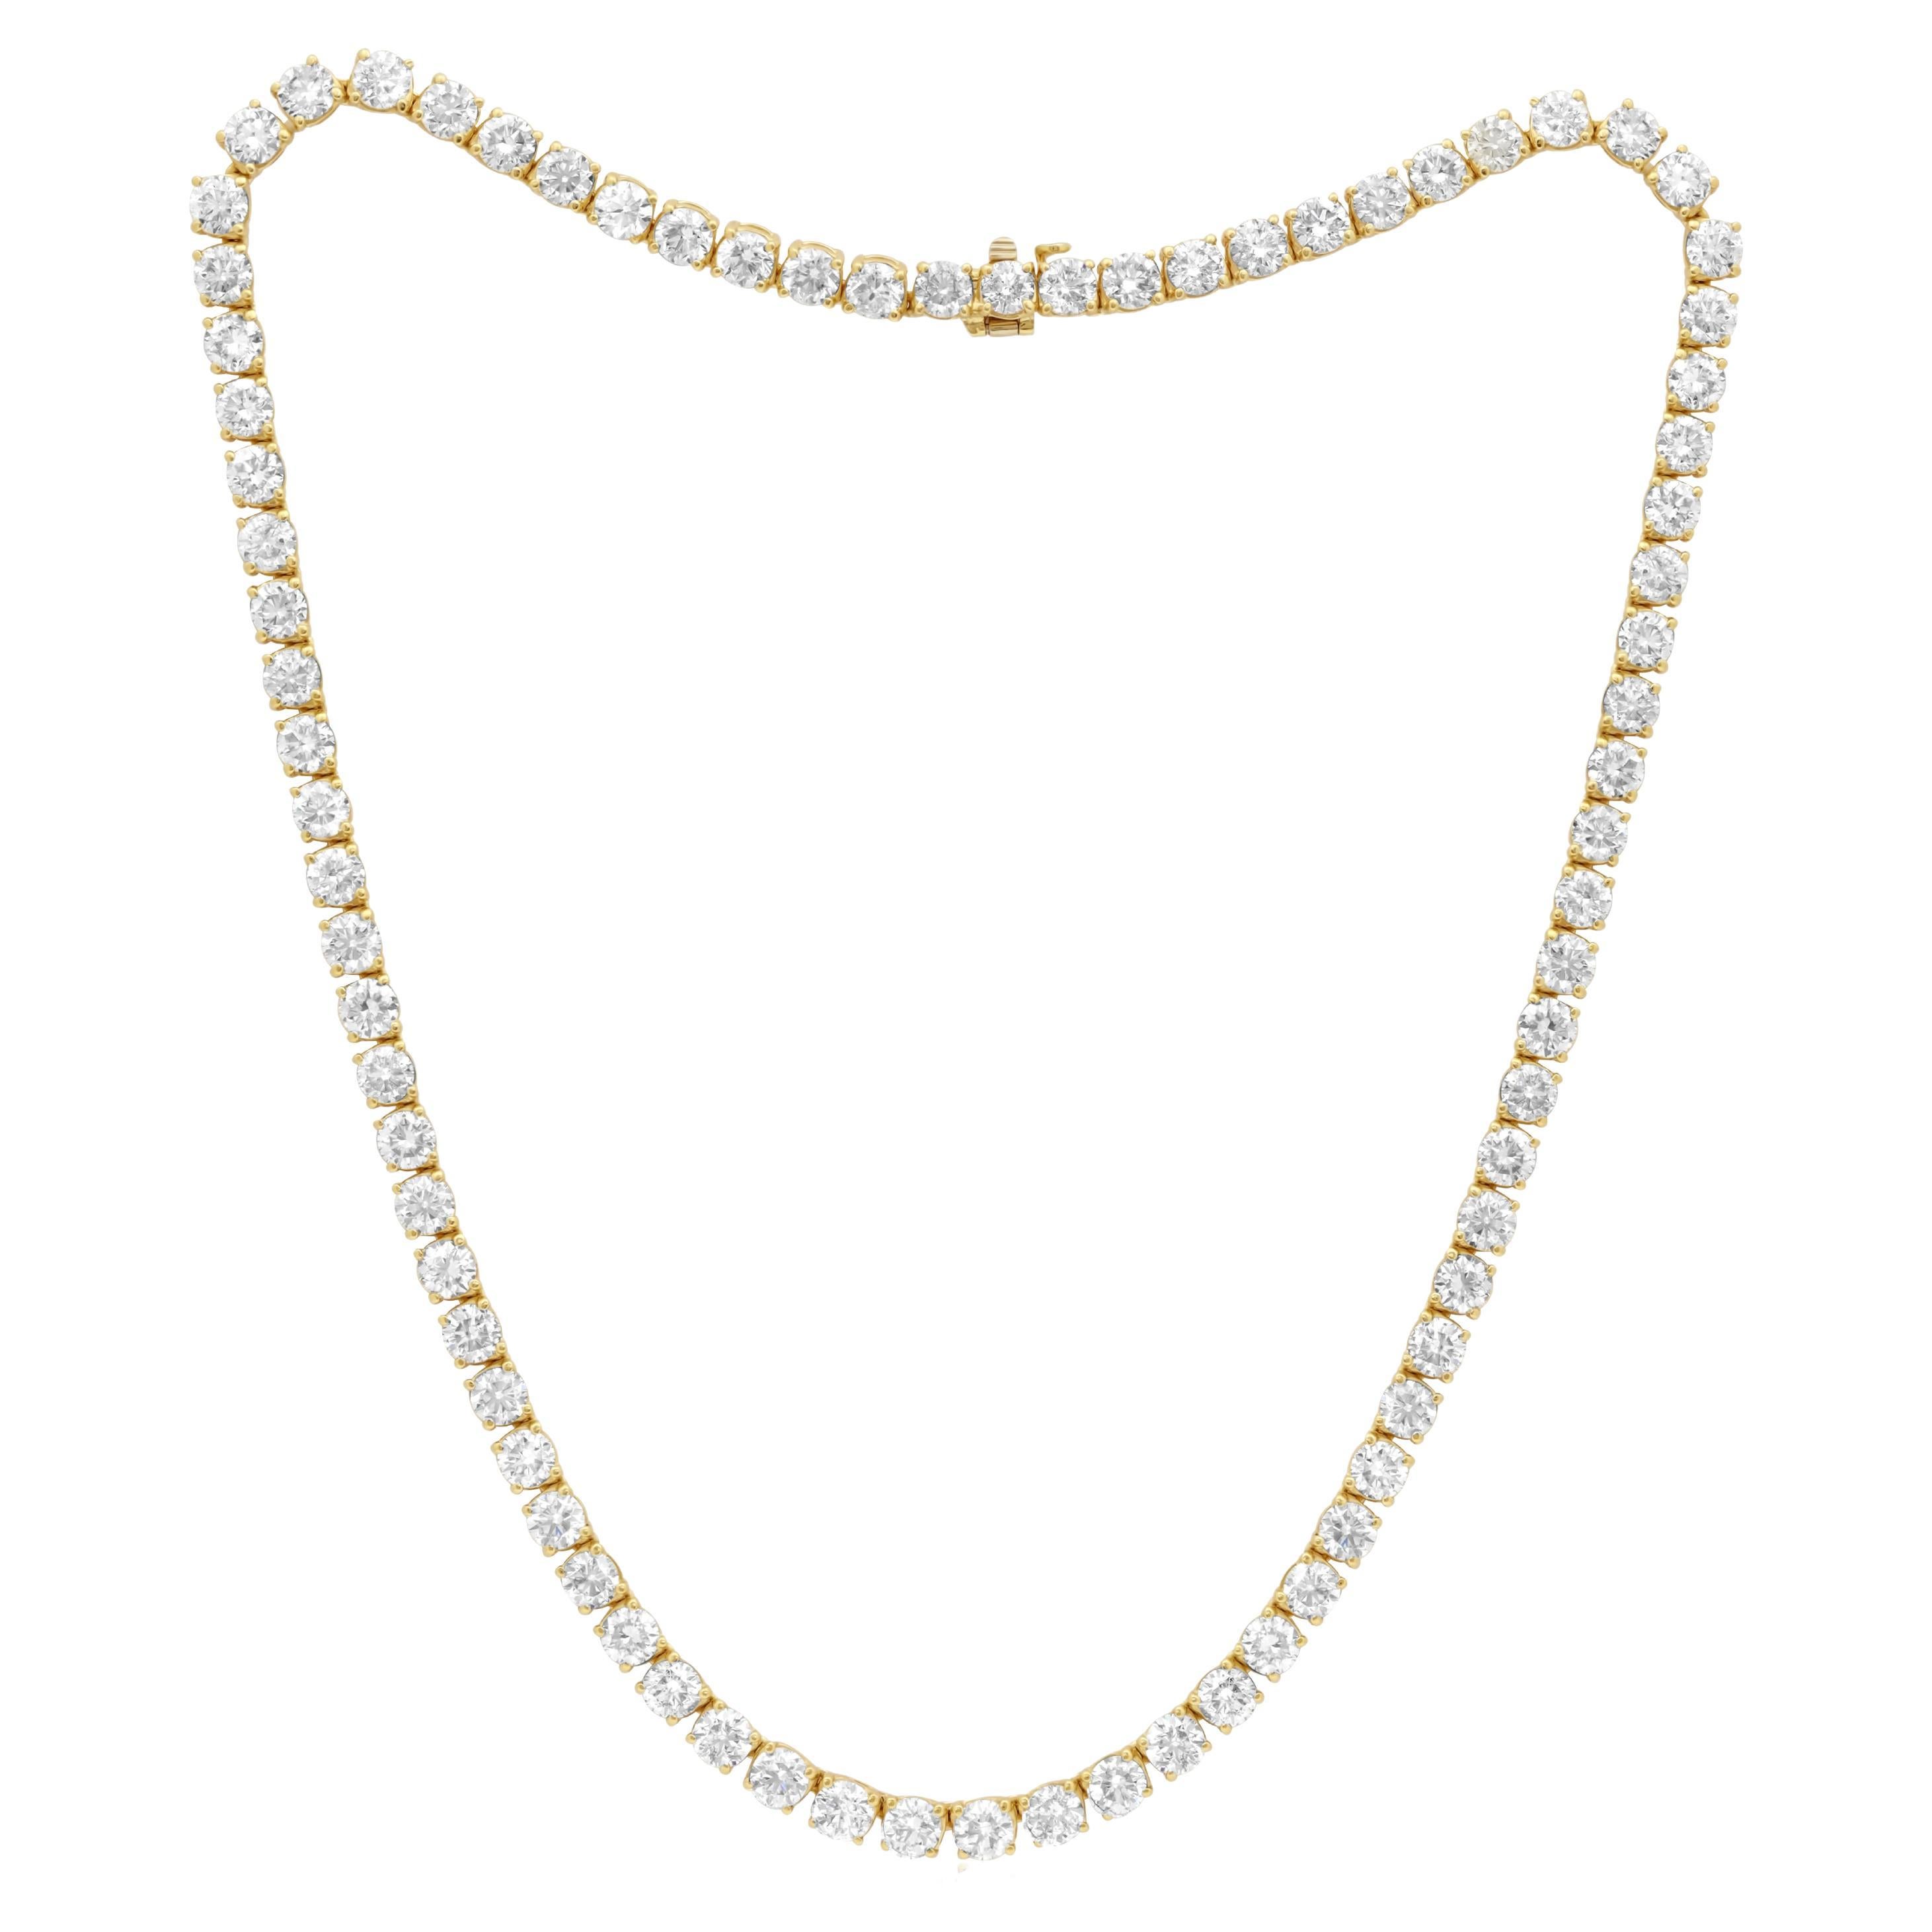 Diana M. Custom 7.00 cts Round 4 Prong Diamond 14K Yellow Gold Tennis Necklace  For Sale